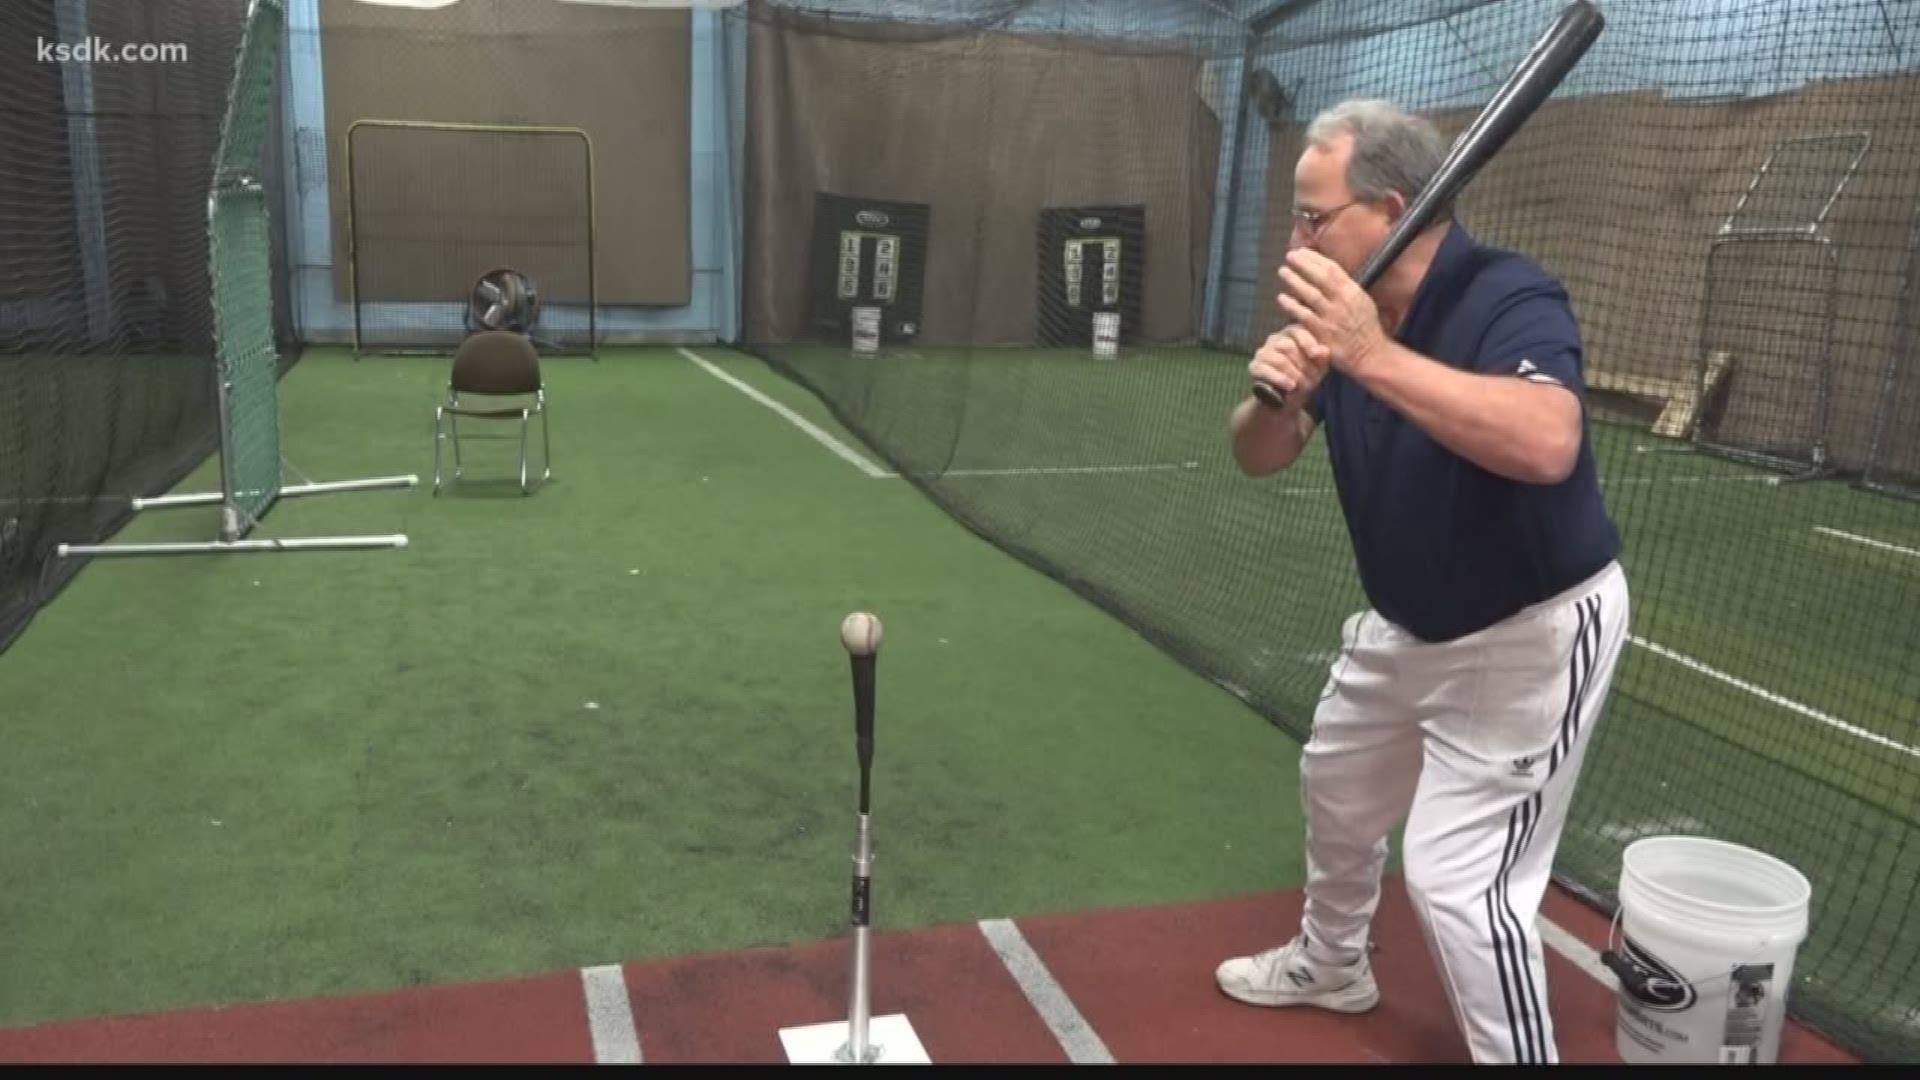 It's unbelievable': St. Peters man now personal hitting coach to Aaron  Judge 